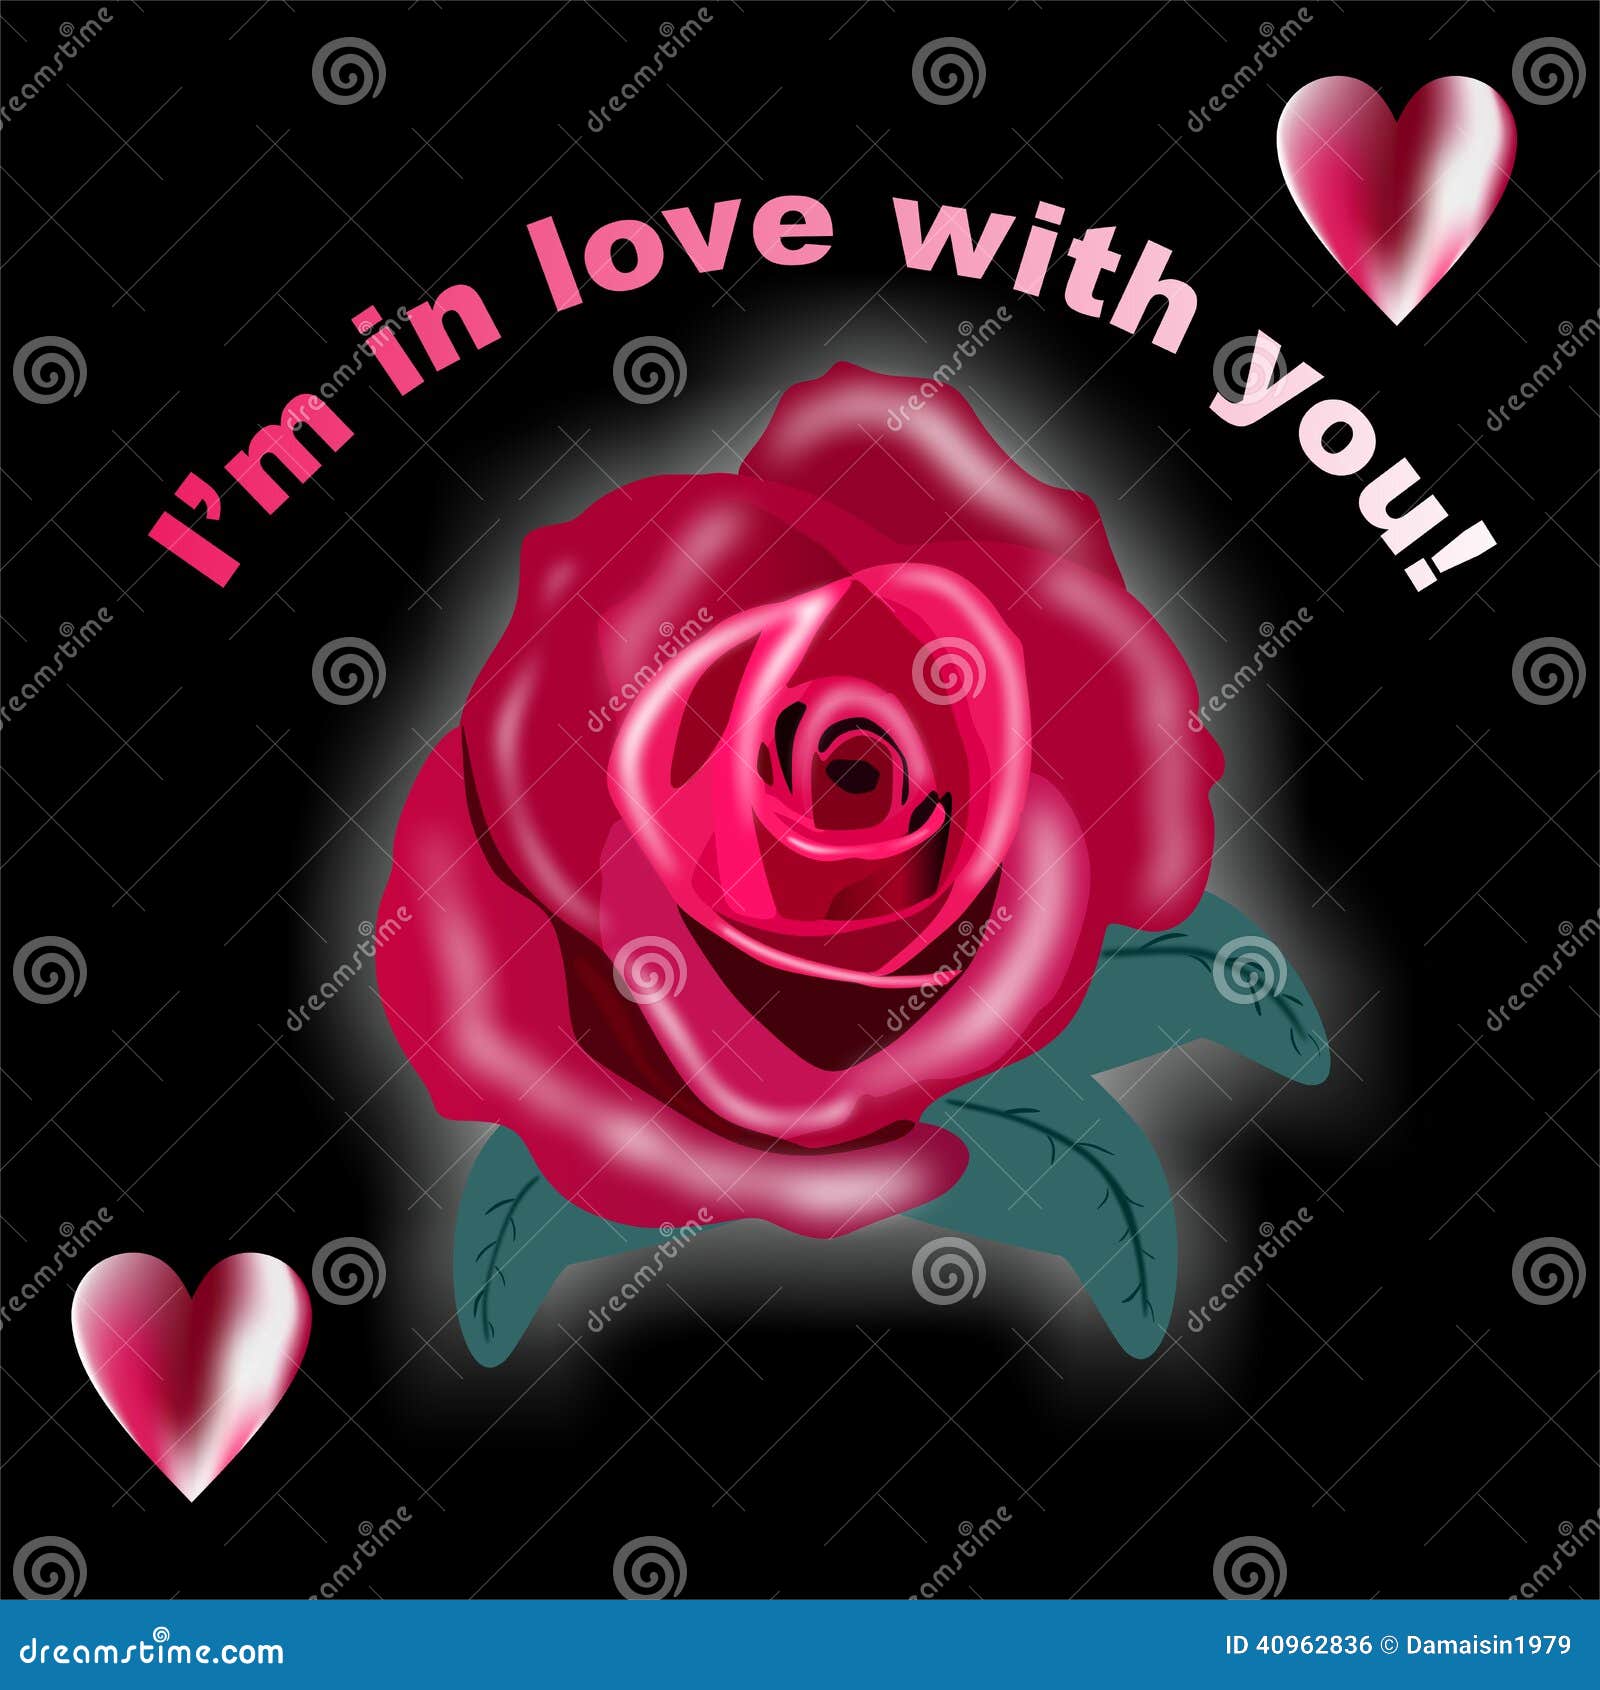 I m in love with you stock illustration. Illustration of original - 40962836